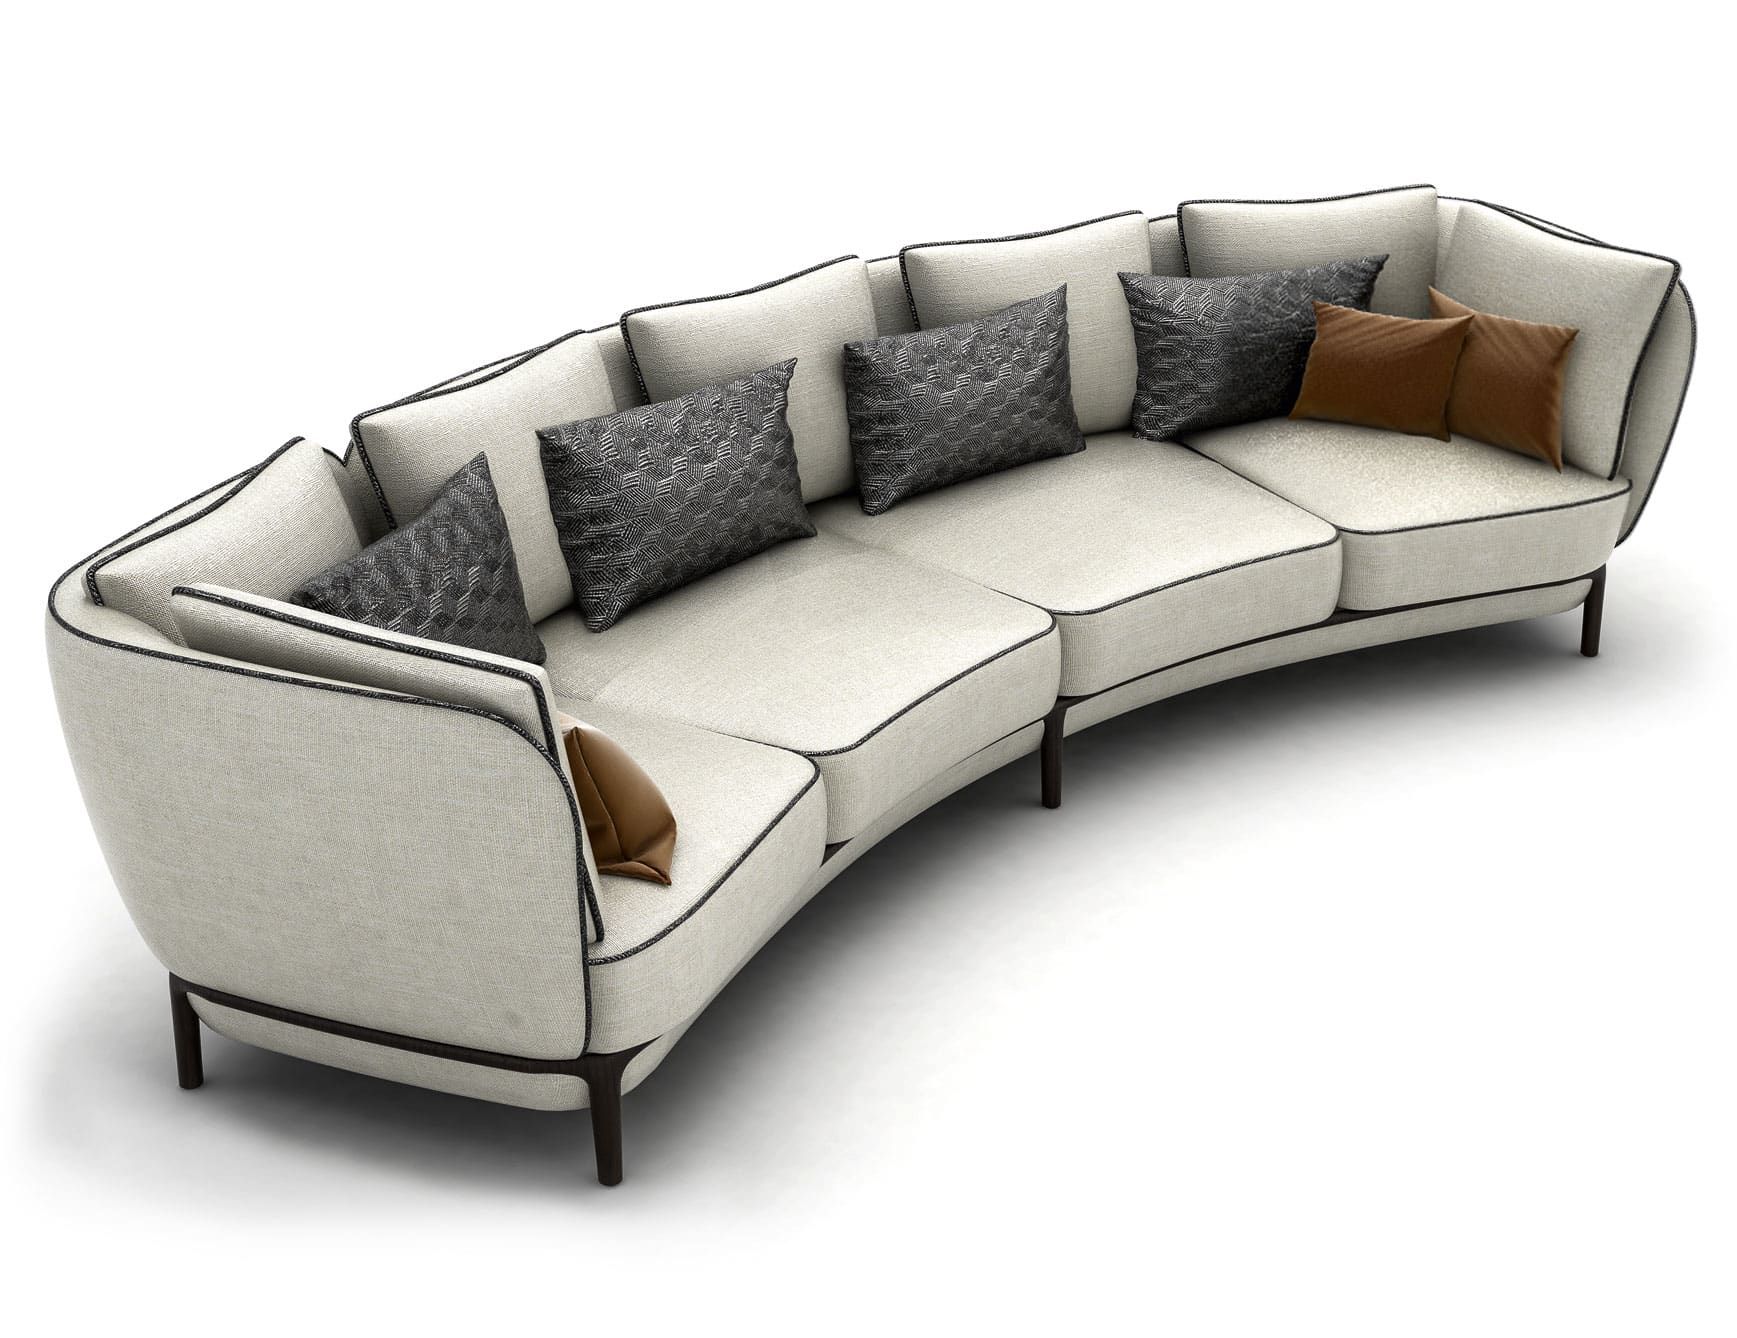 Durban modern luxury upholstery with grey leather